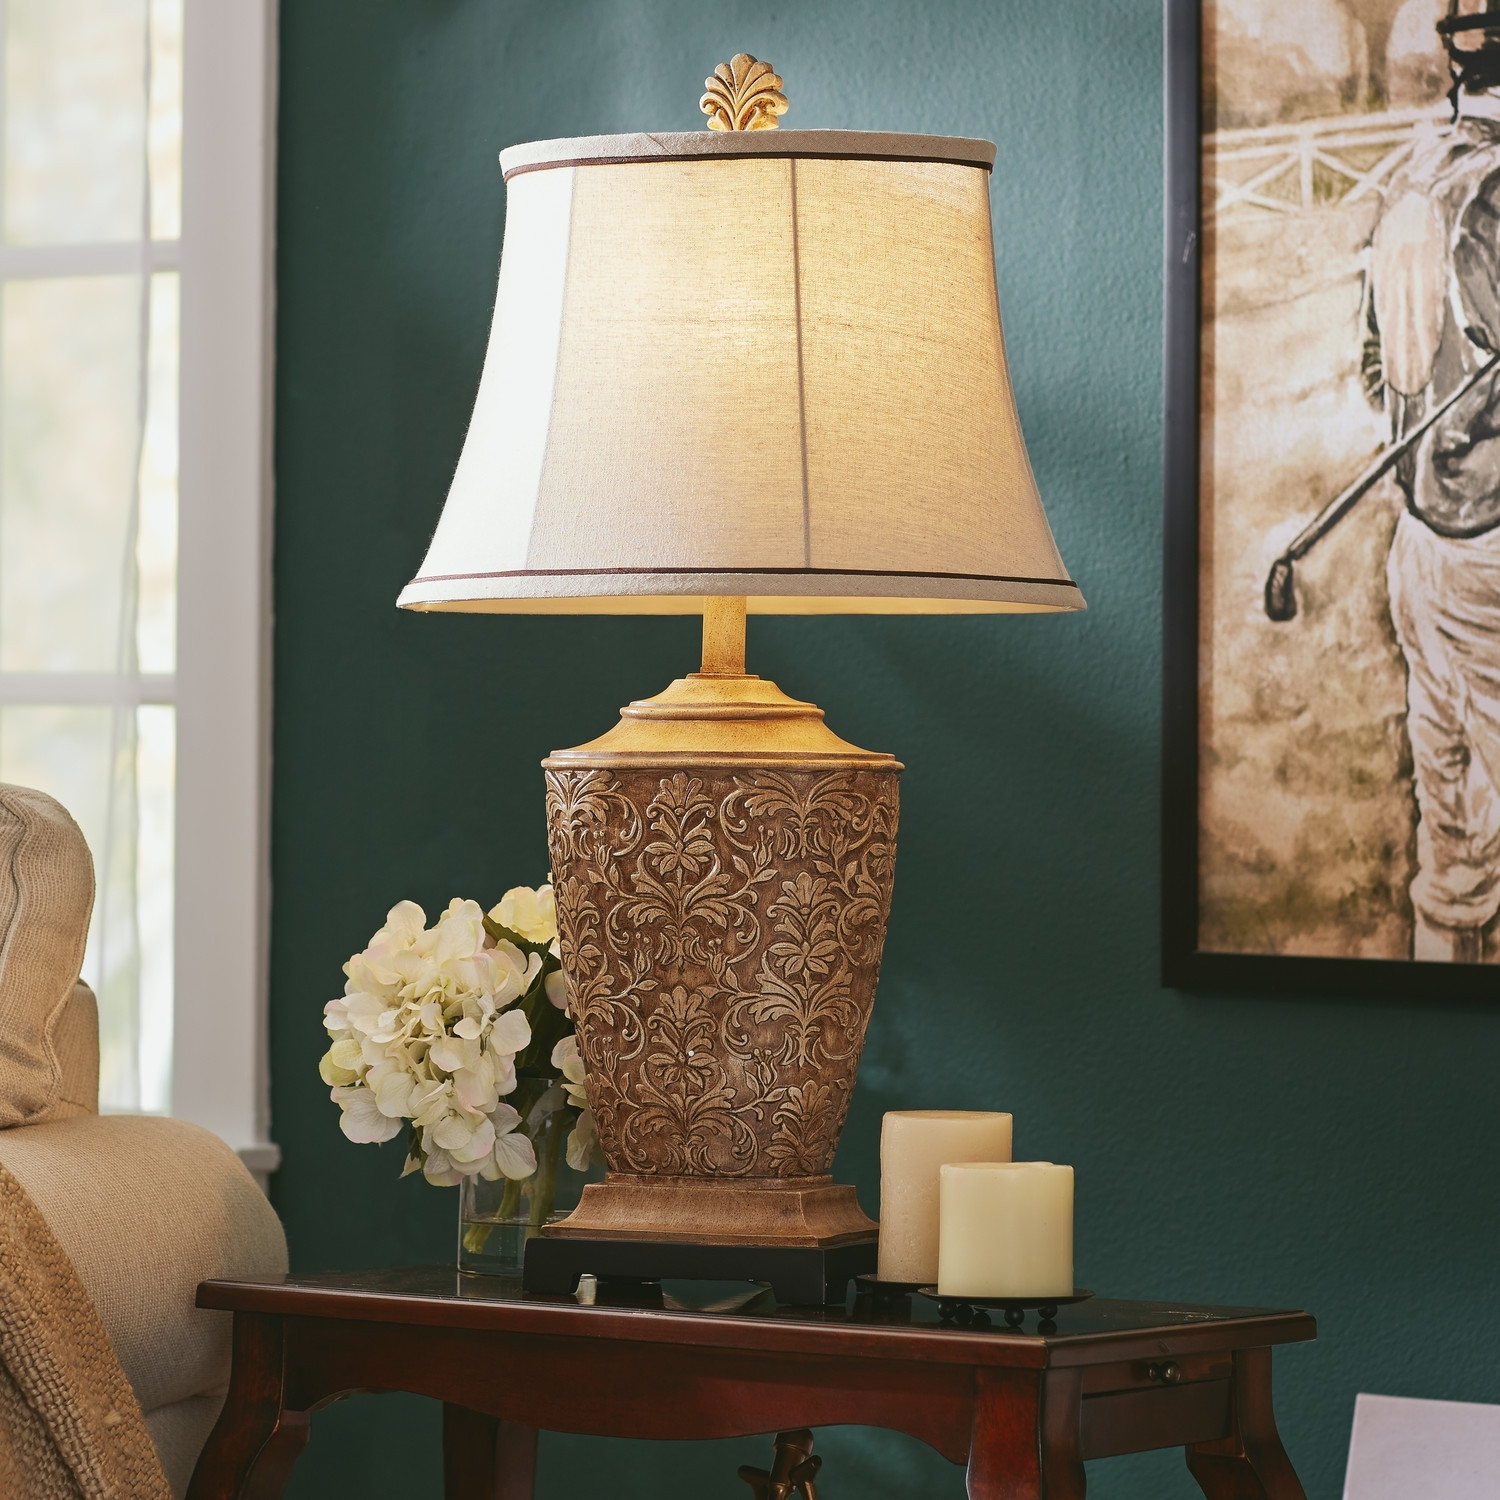 Table Lamps for Living Room Fresh Living Room Table Lamps 10 Methods to Bring Incandescent